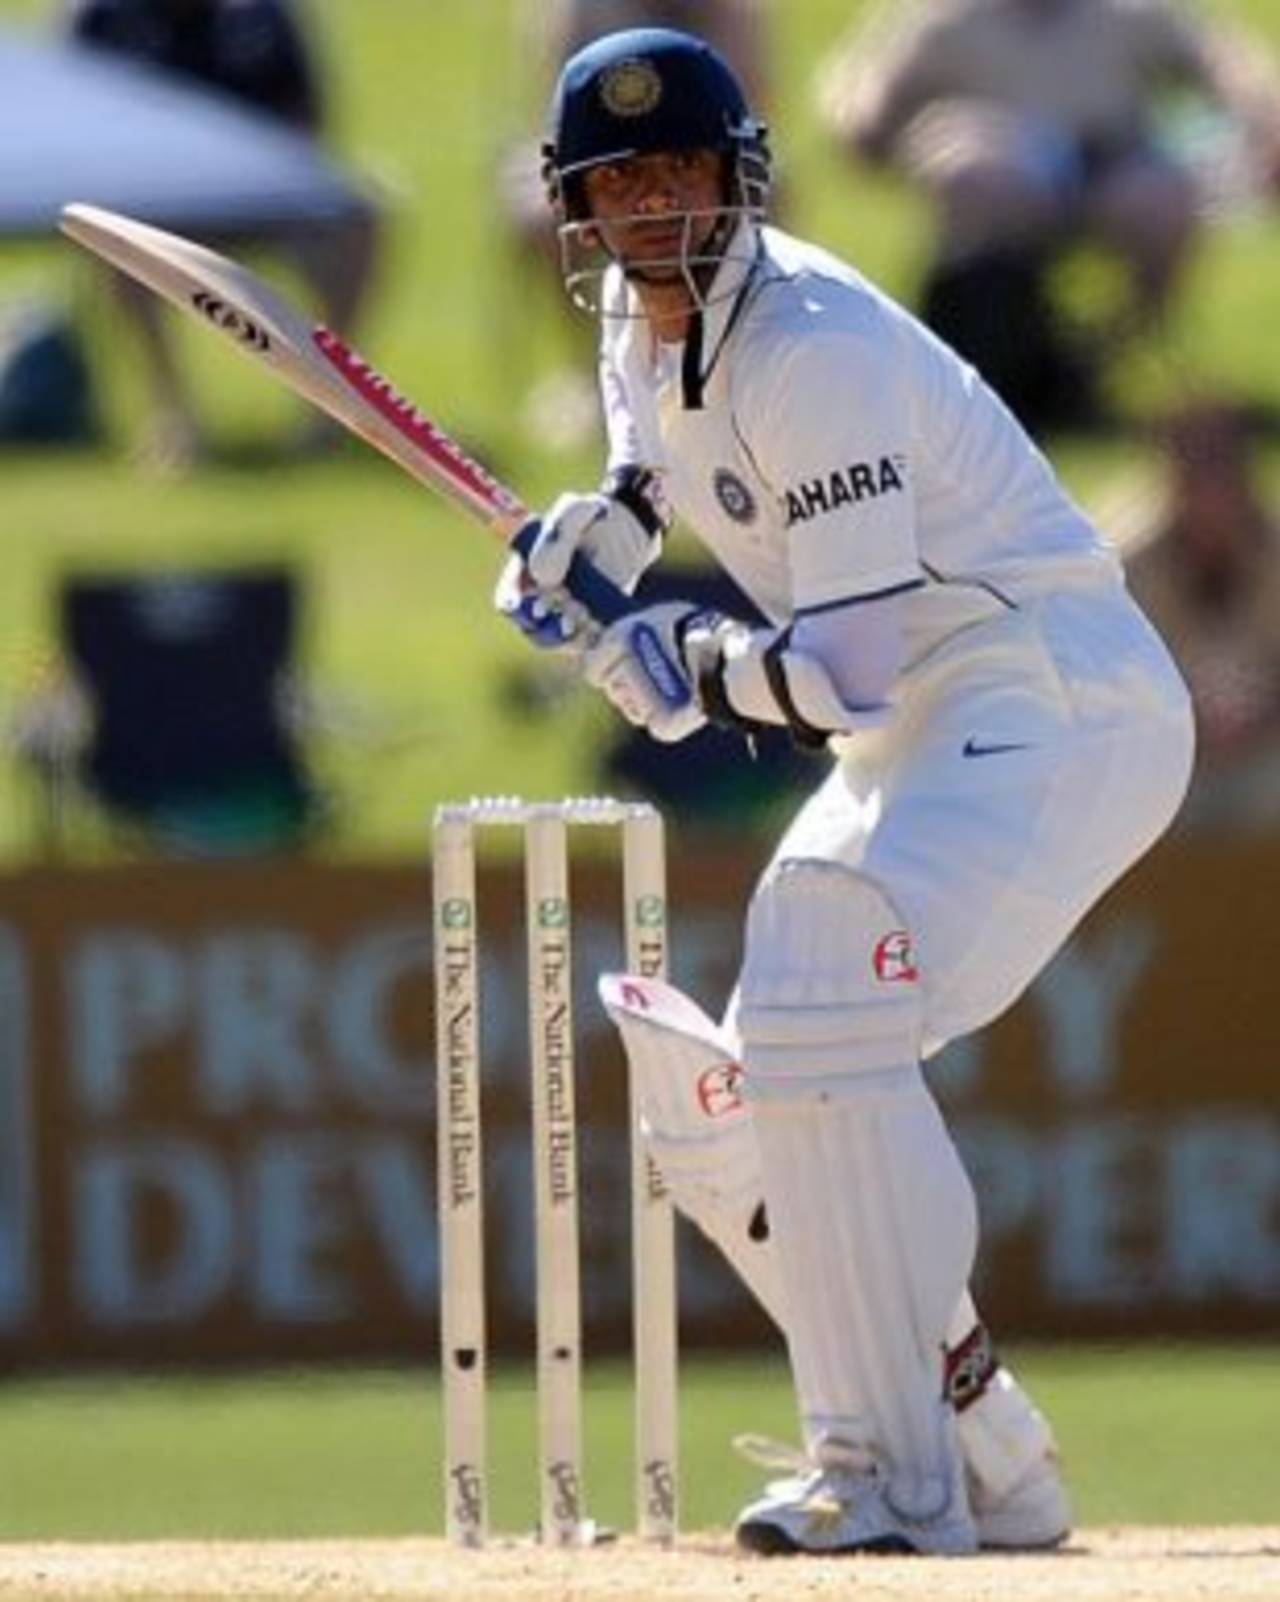 Rahul Dravid prepares to play the ball, New Zealand v India, 2nd Test, Napier, 4th day, March 29, 2009